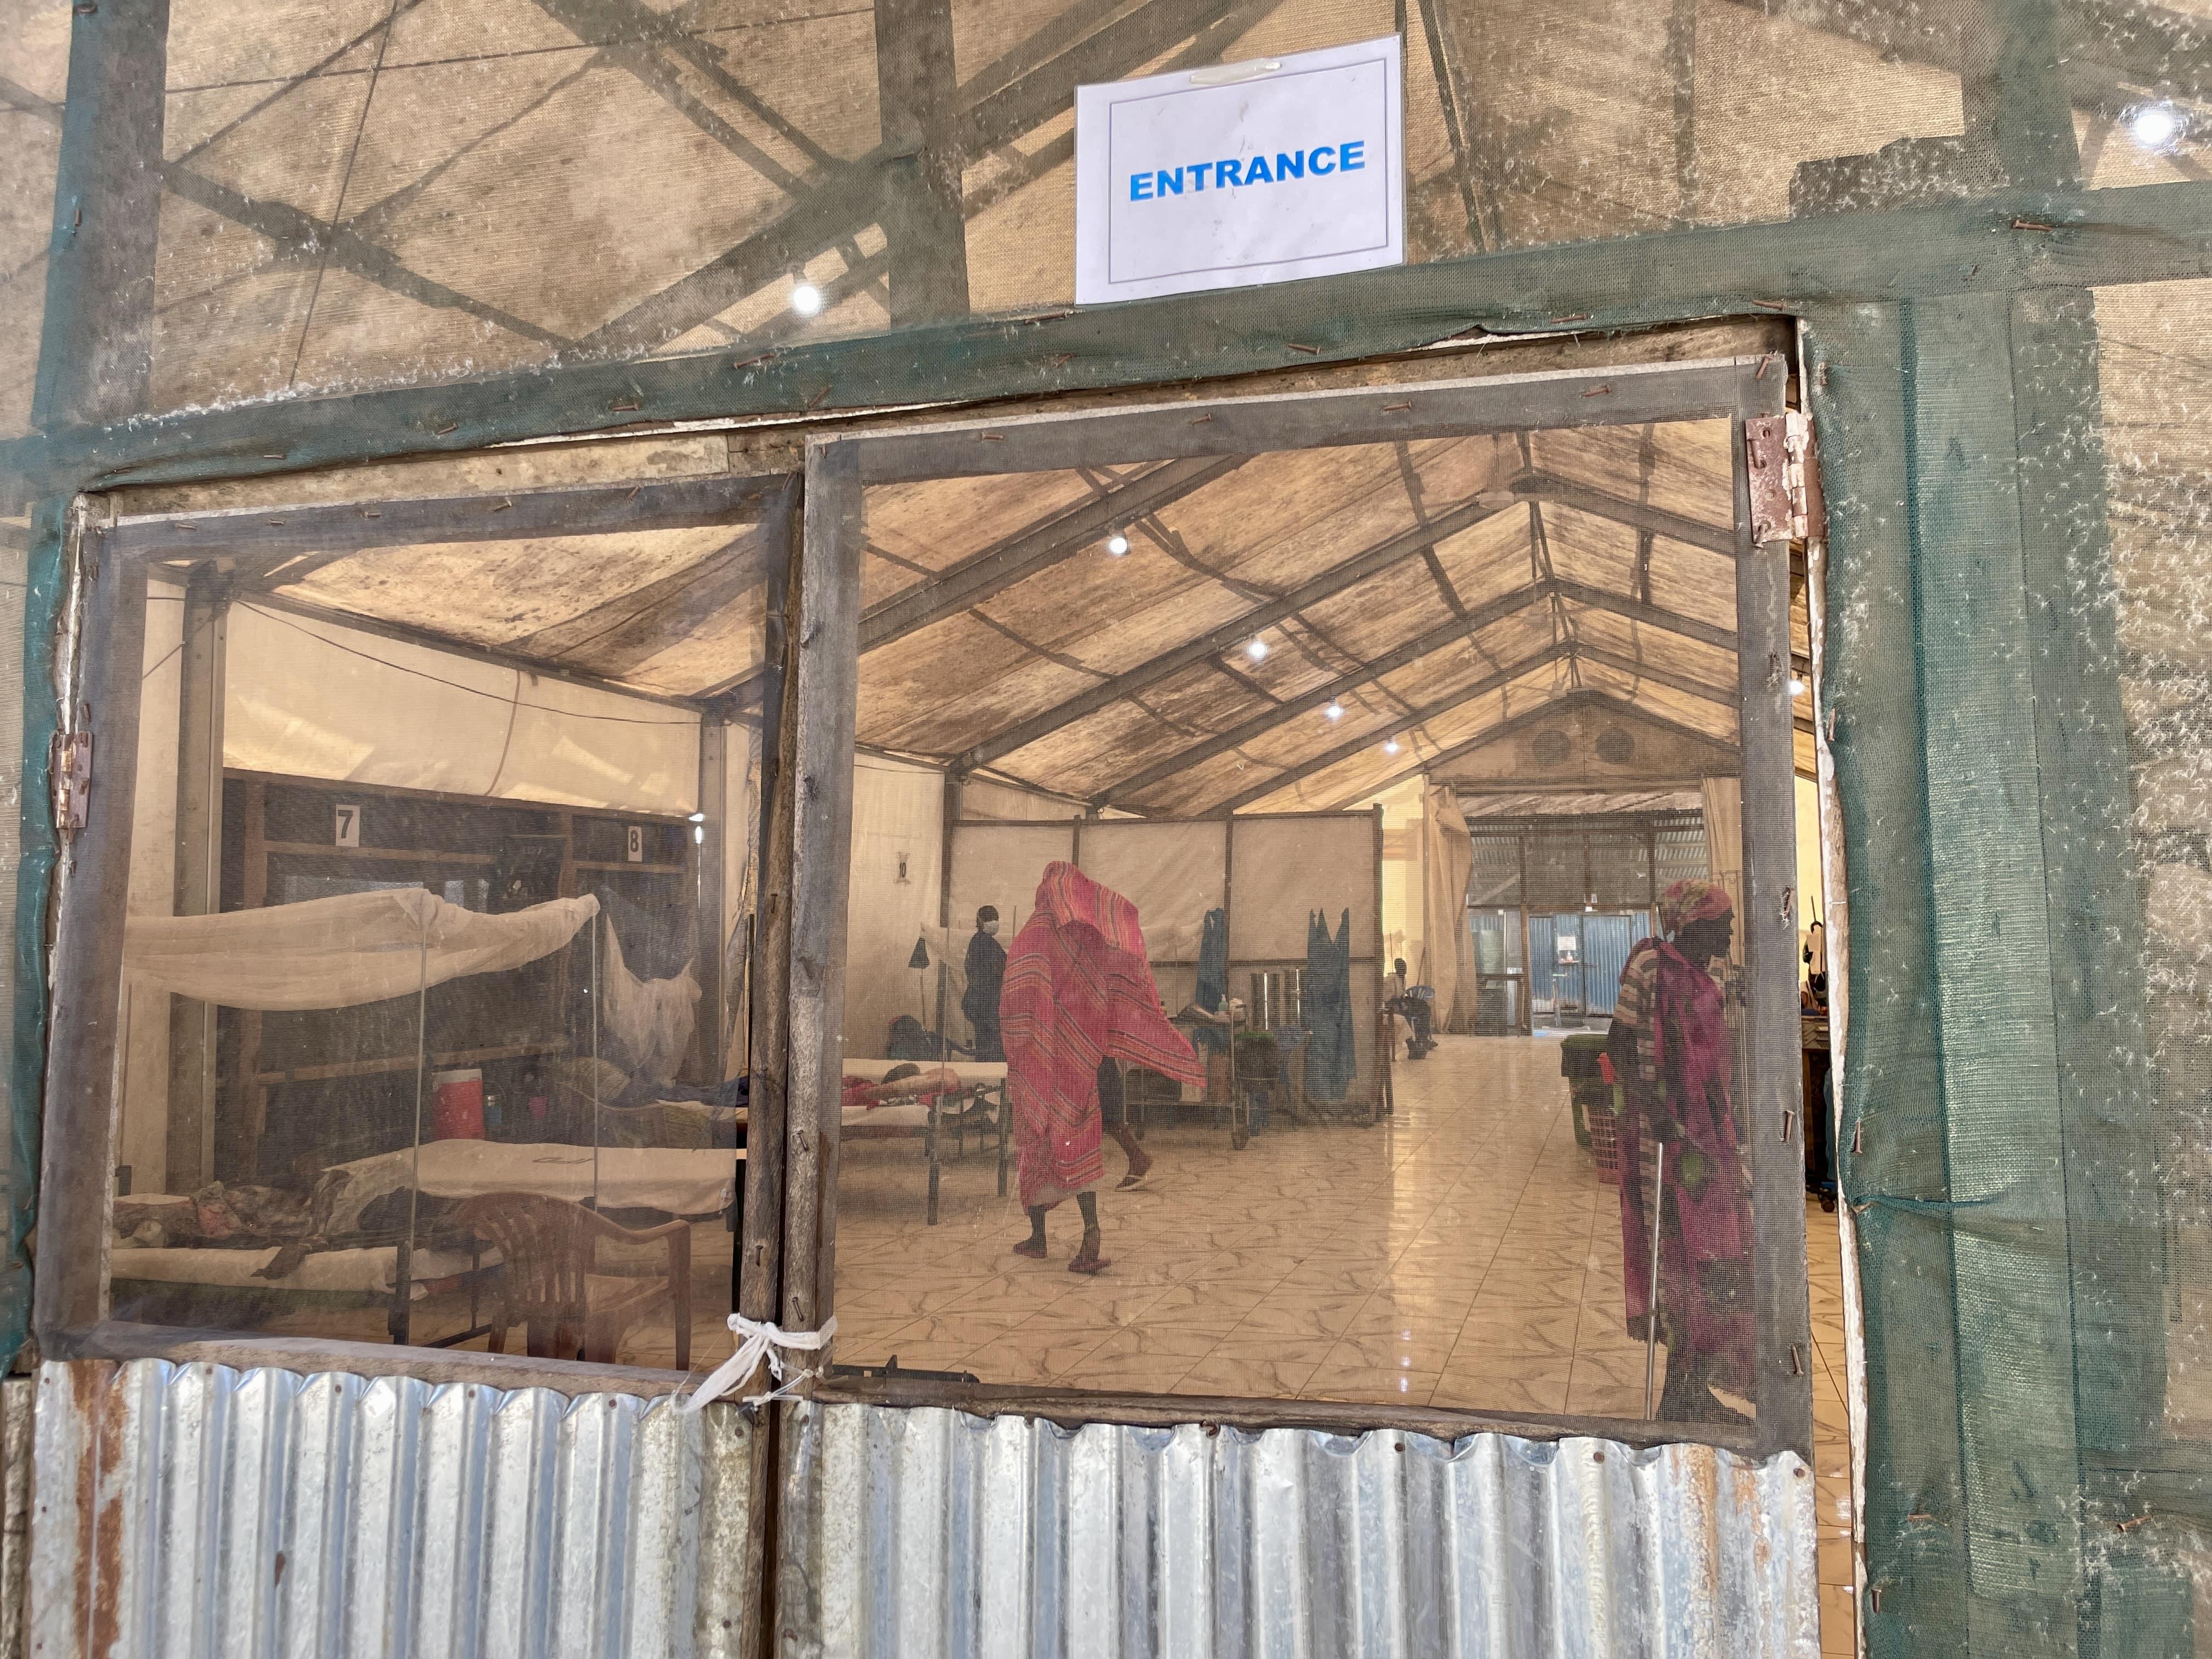 Sudan War & South Sudan Refugees: View of the entrance of the main ward of MSF hospital inside the protection of civilians (POC) site in Malakal.